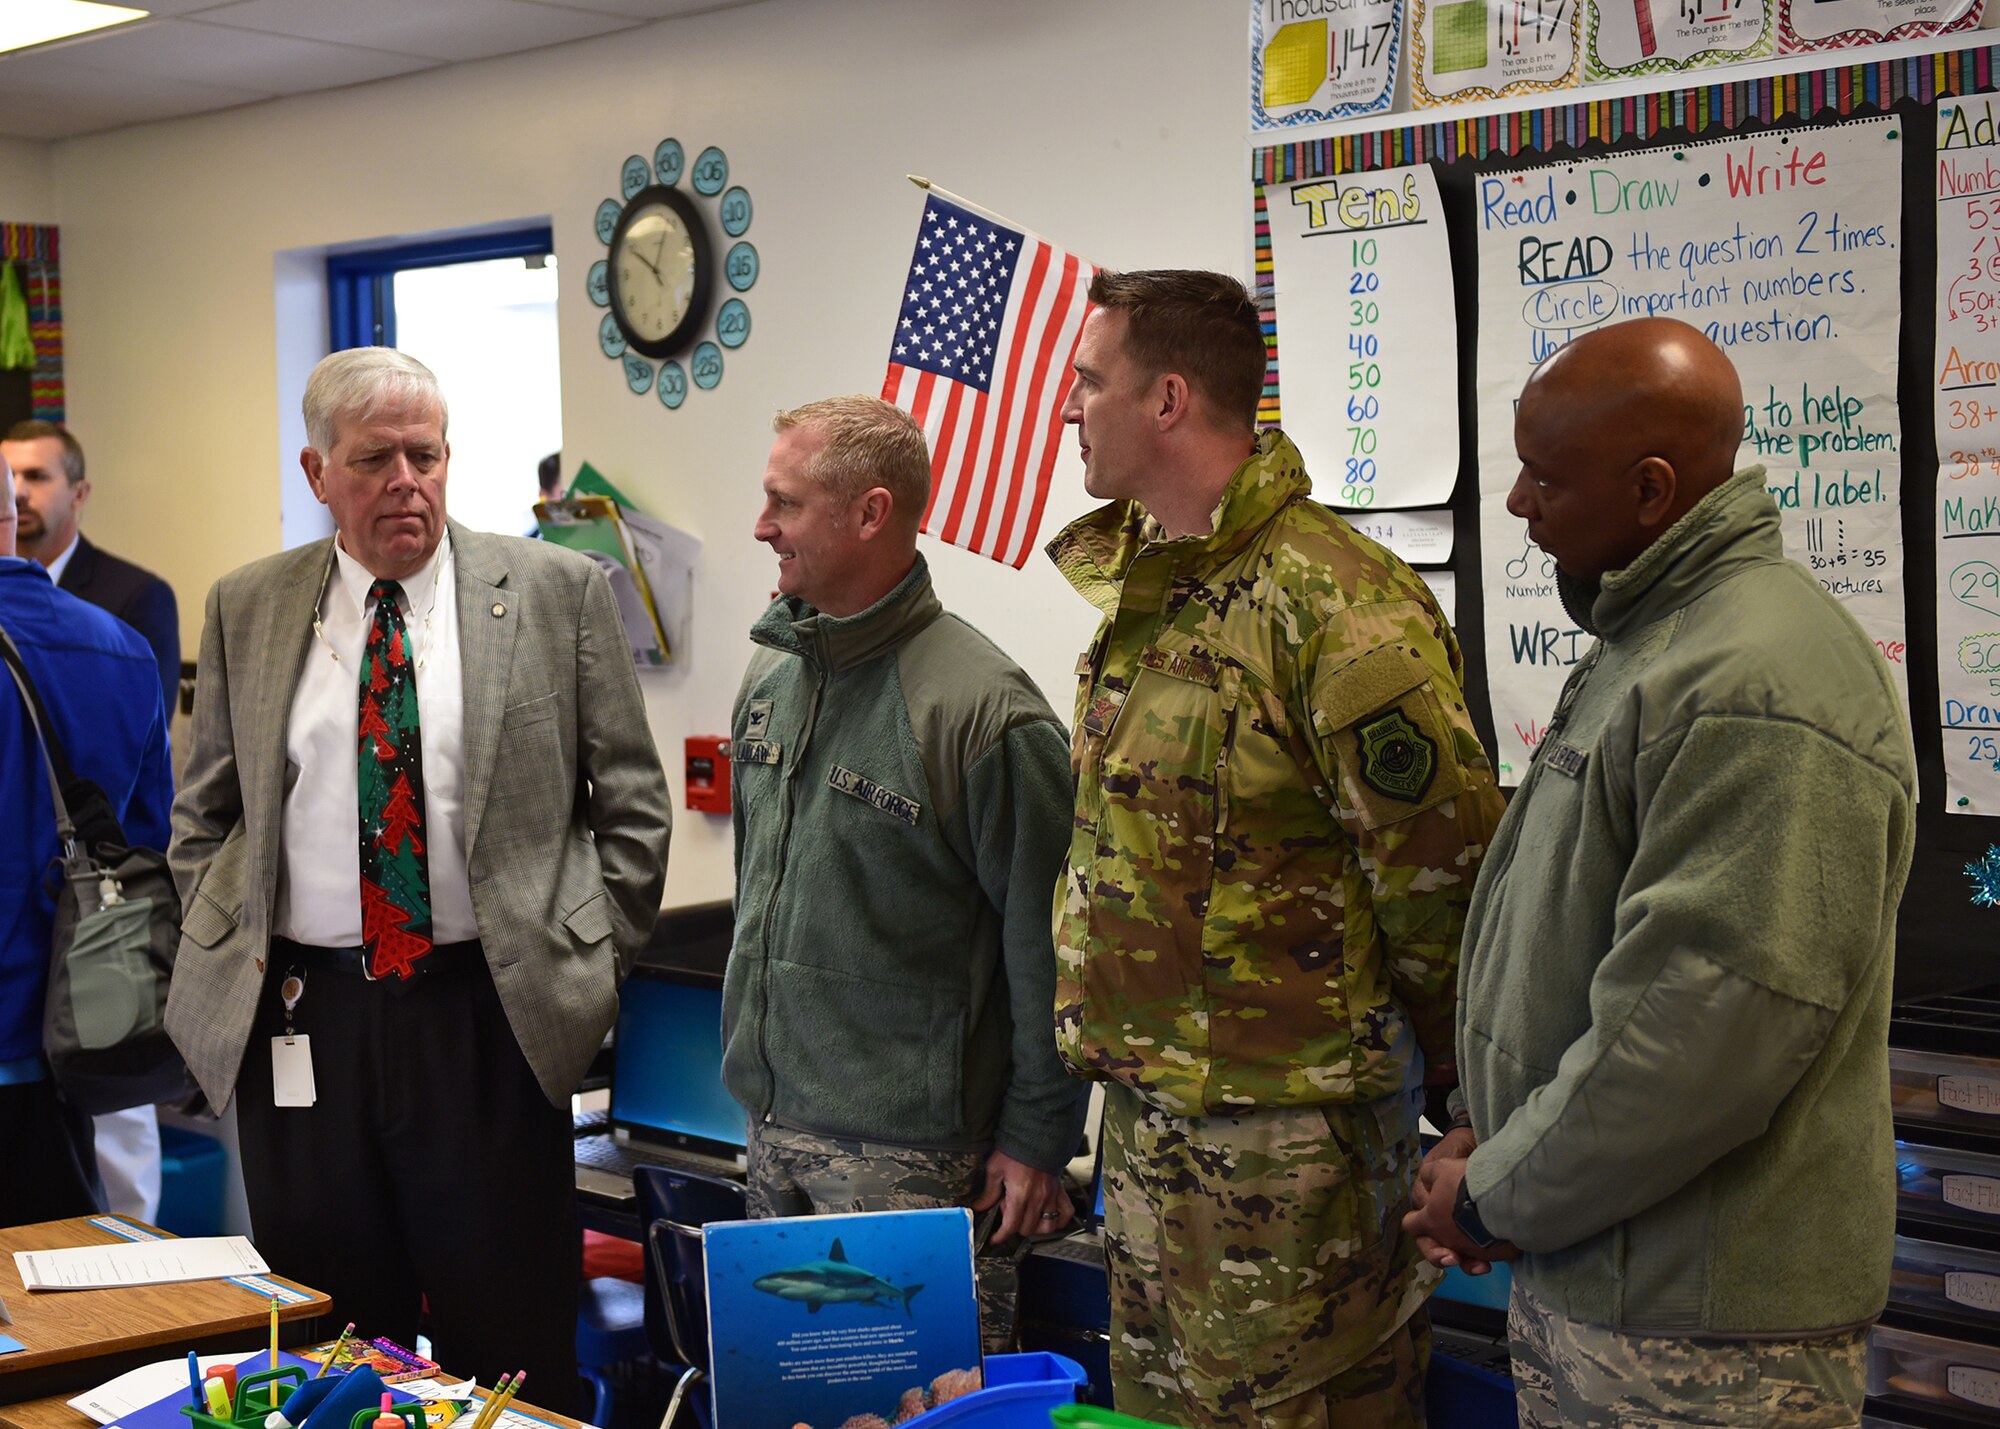 From left to right, William Husfelt, Bay District Schools superintendent, Col. Brain Laidlaw, 325th Fighter Wing commander, Col. Jefferson Hawkins, 325th FW vice commander, and Chief Master Sgt. Craig Williams, 325th FW command chief, wait for students to arrive during the re-opening of Tyndall Elementary School near Tyndall Air Force Base, Fla., Dec. 10, 2018. Open for the first time since Hurricane Michael, approximately 200 of the original 750 students returned to school, many of whom have parents working at Tyndall. (U.S. Air Force photo by Senior Airman Isaiah J. Soliz)